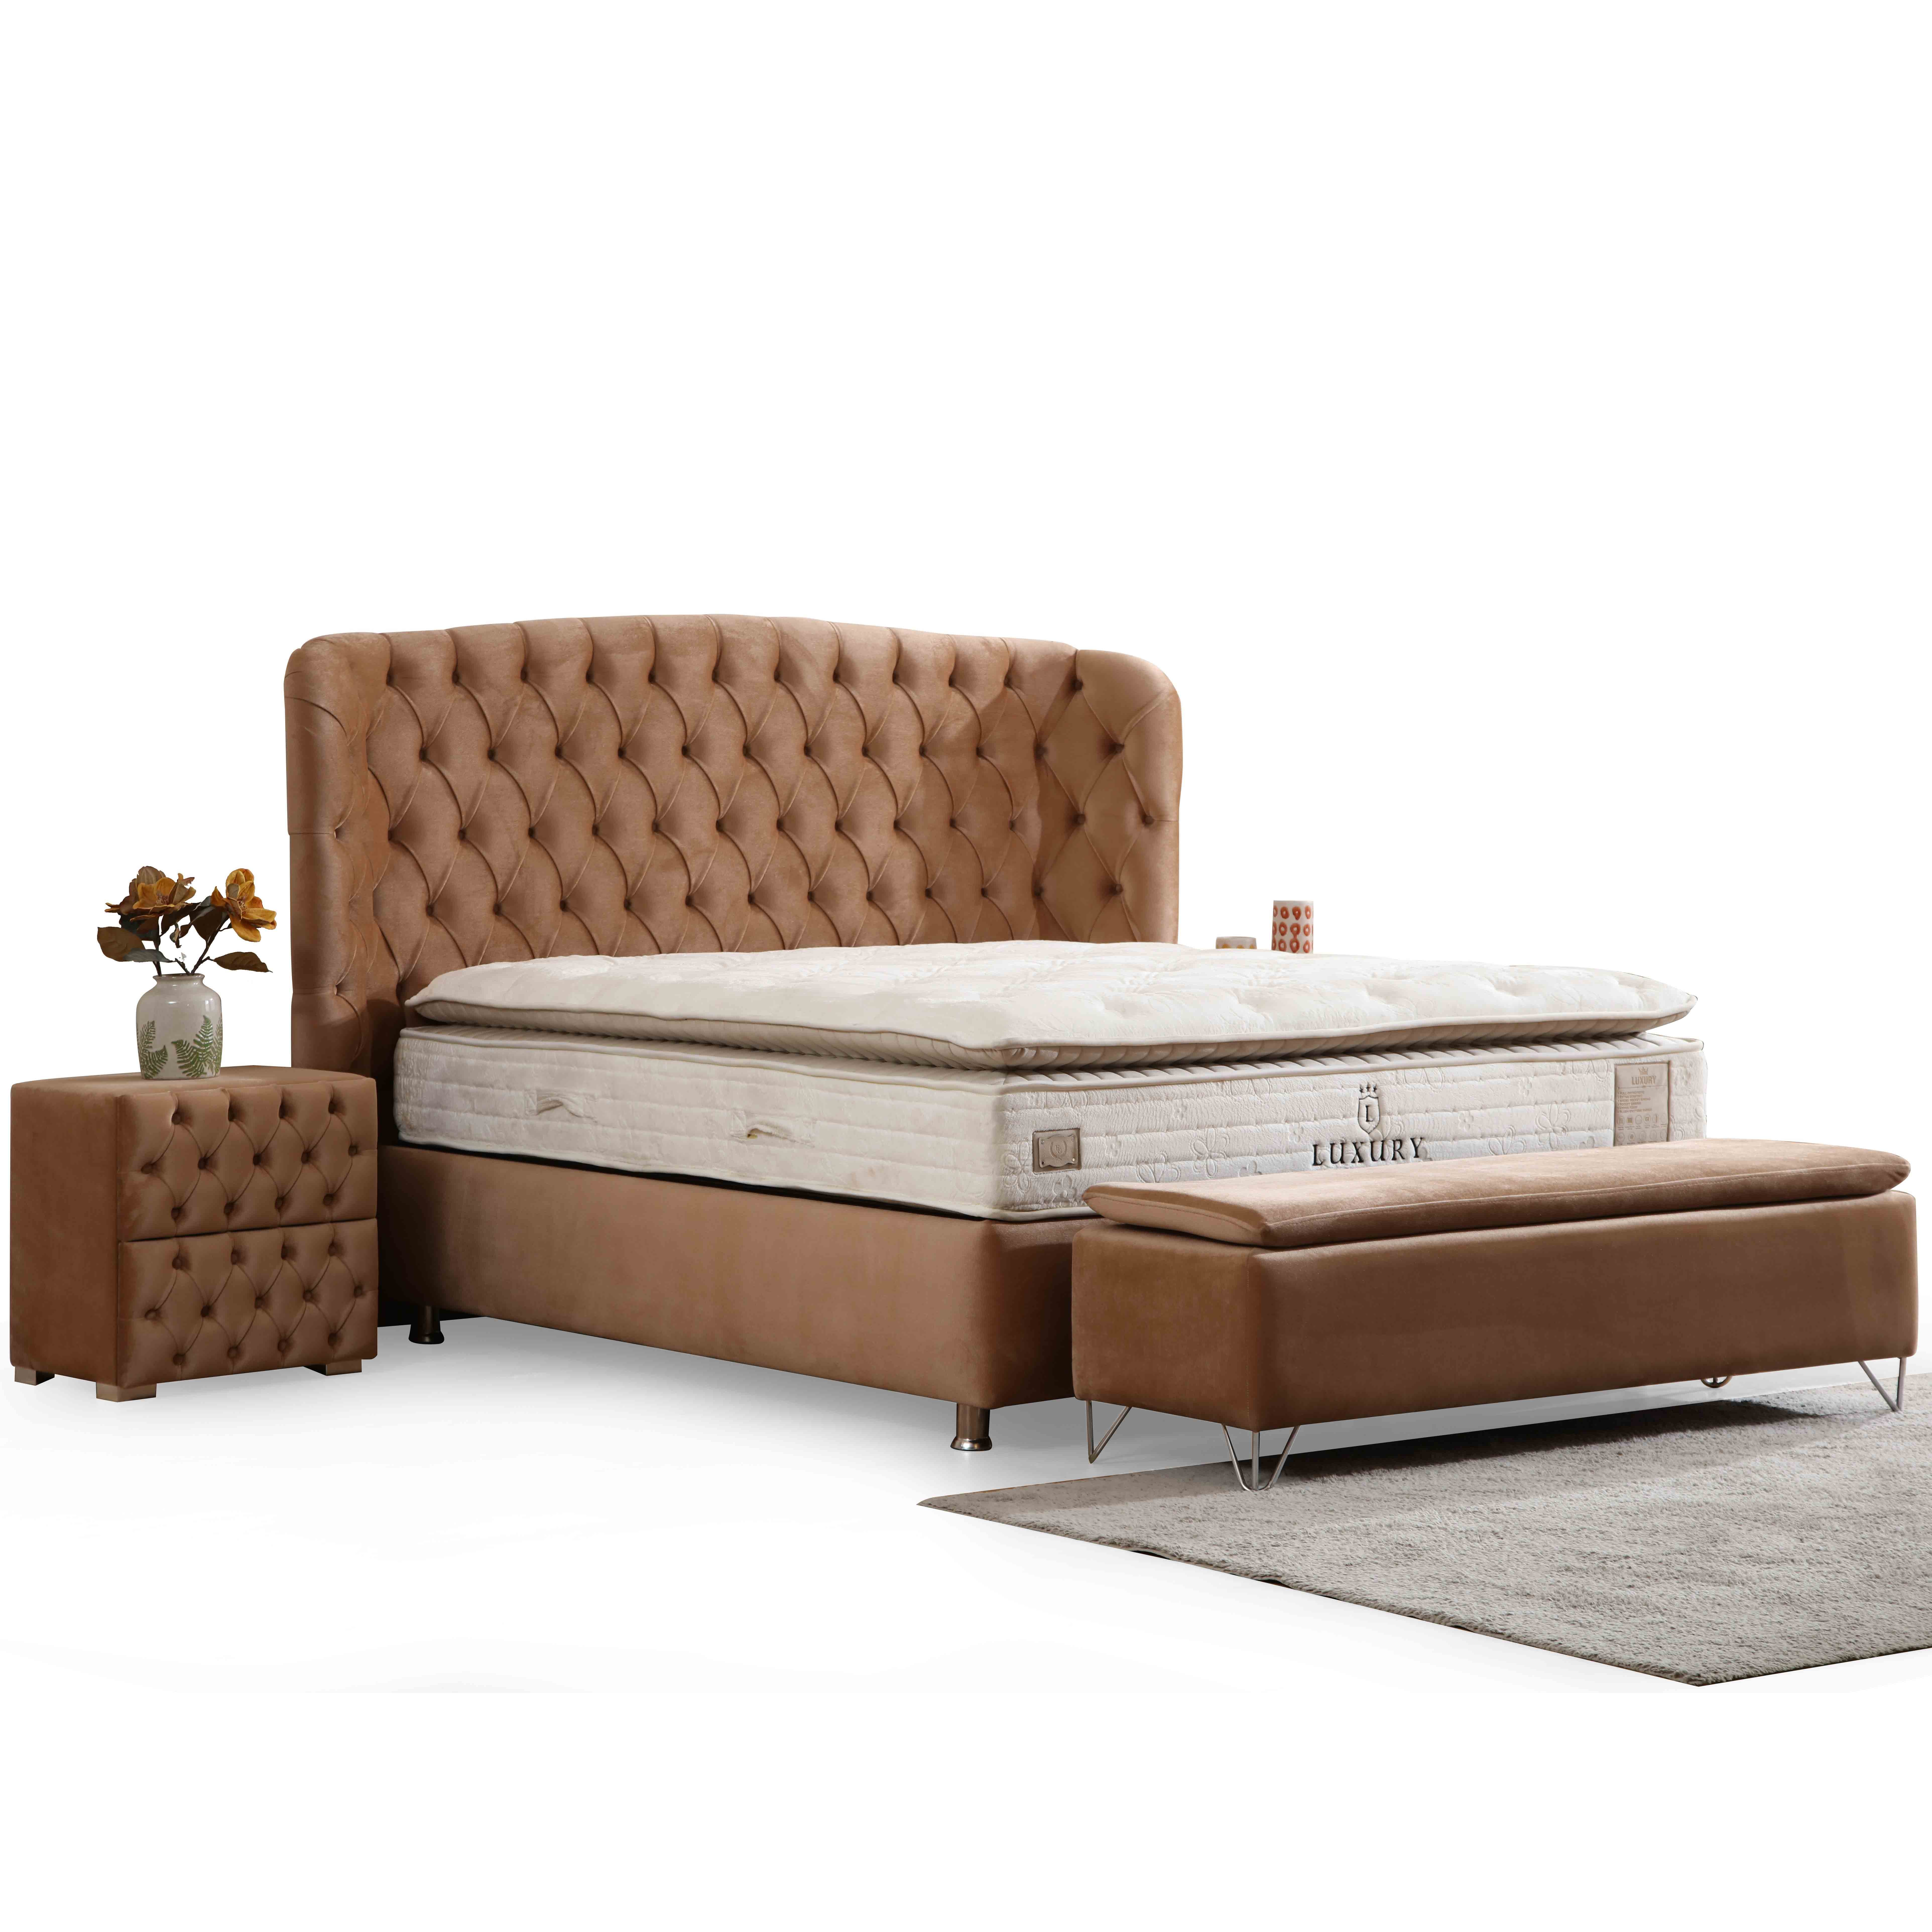 Riva Bed With Storage 90x190 cm